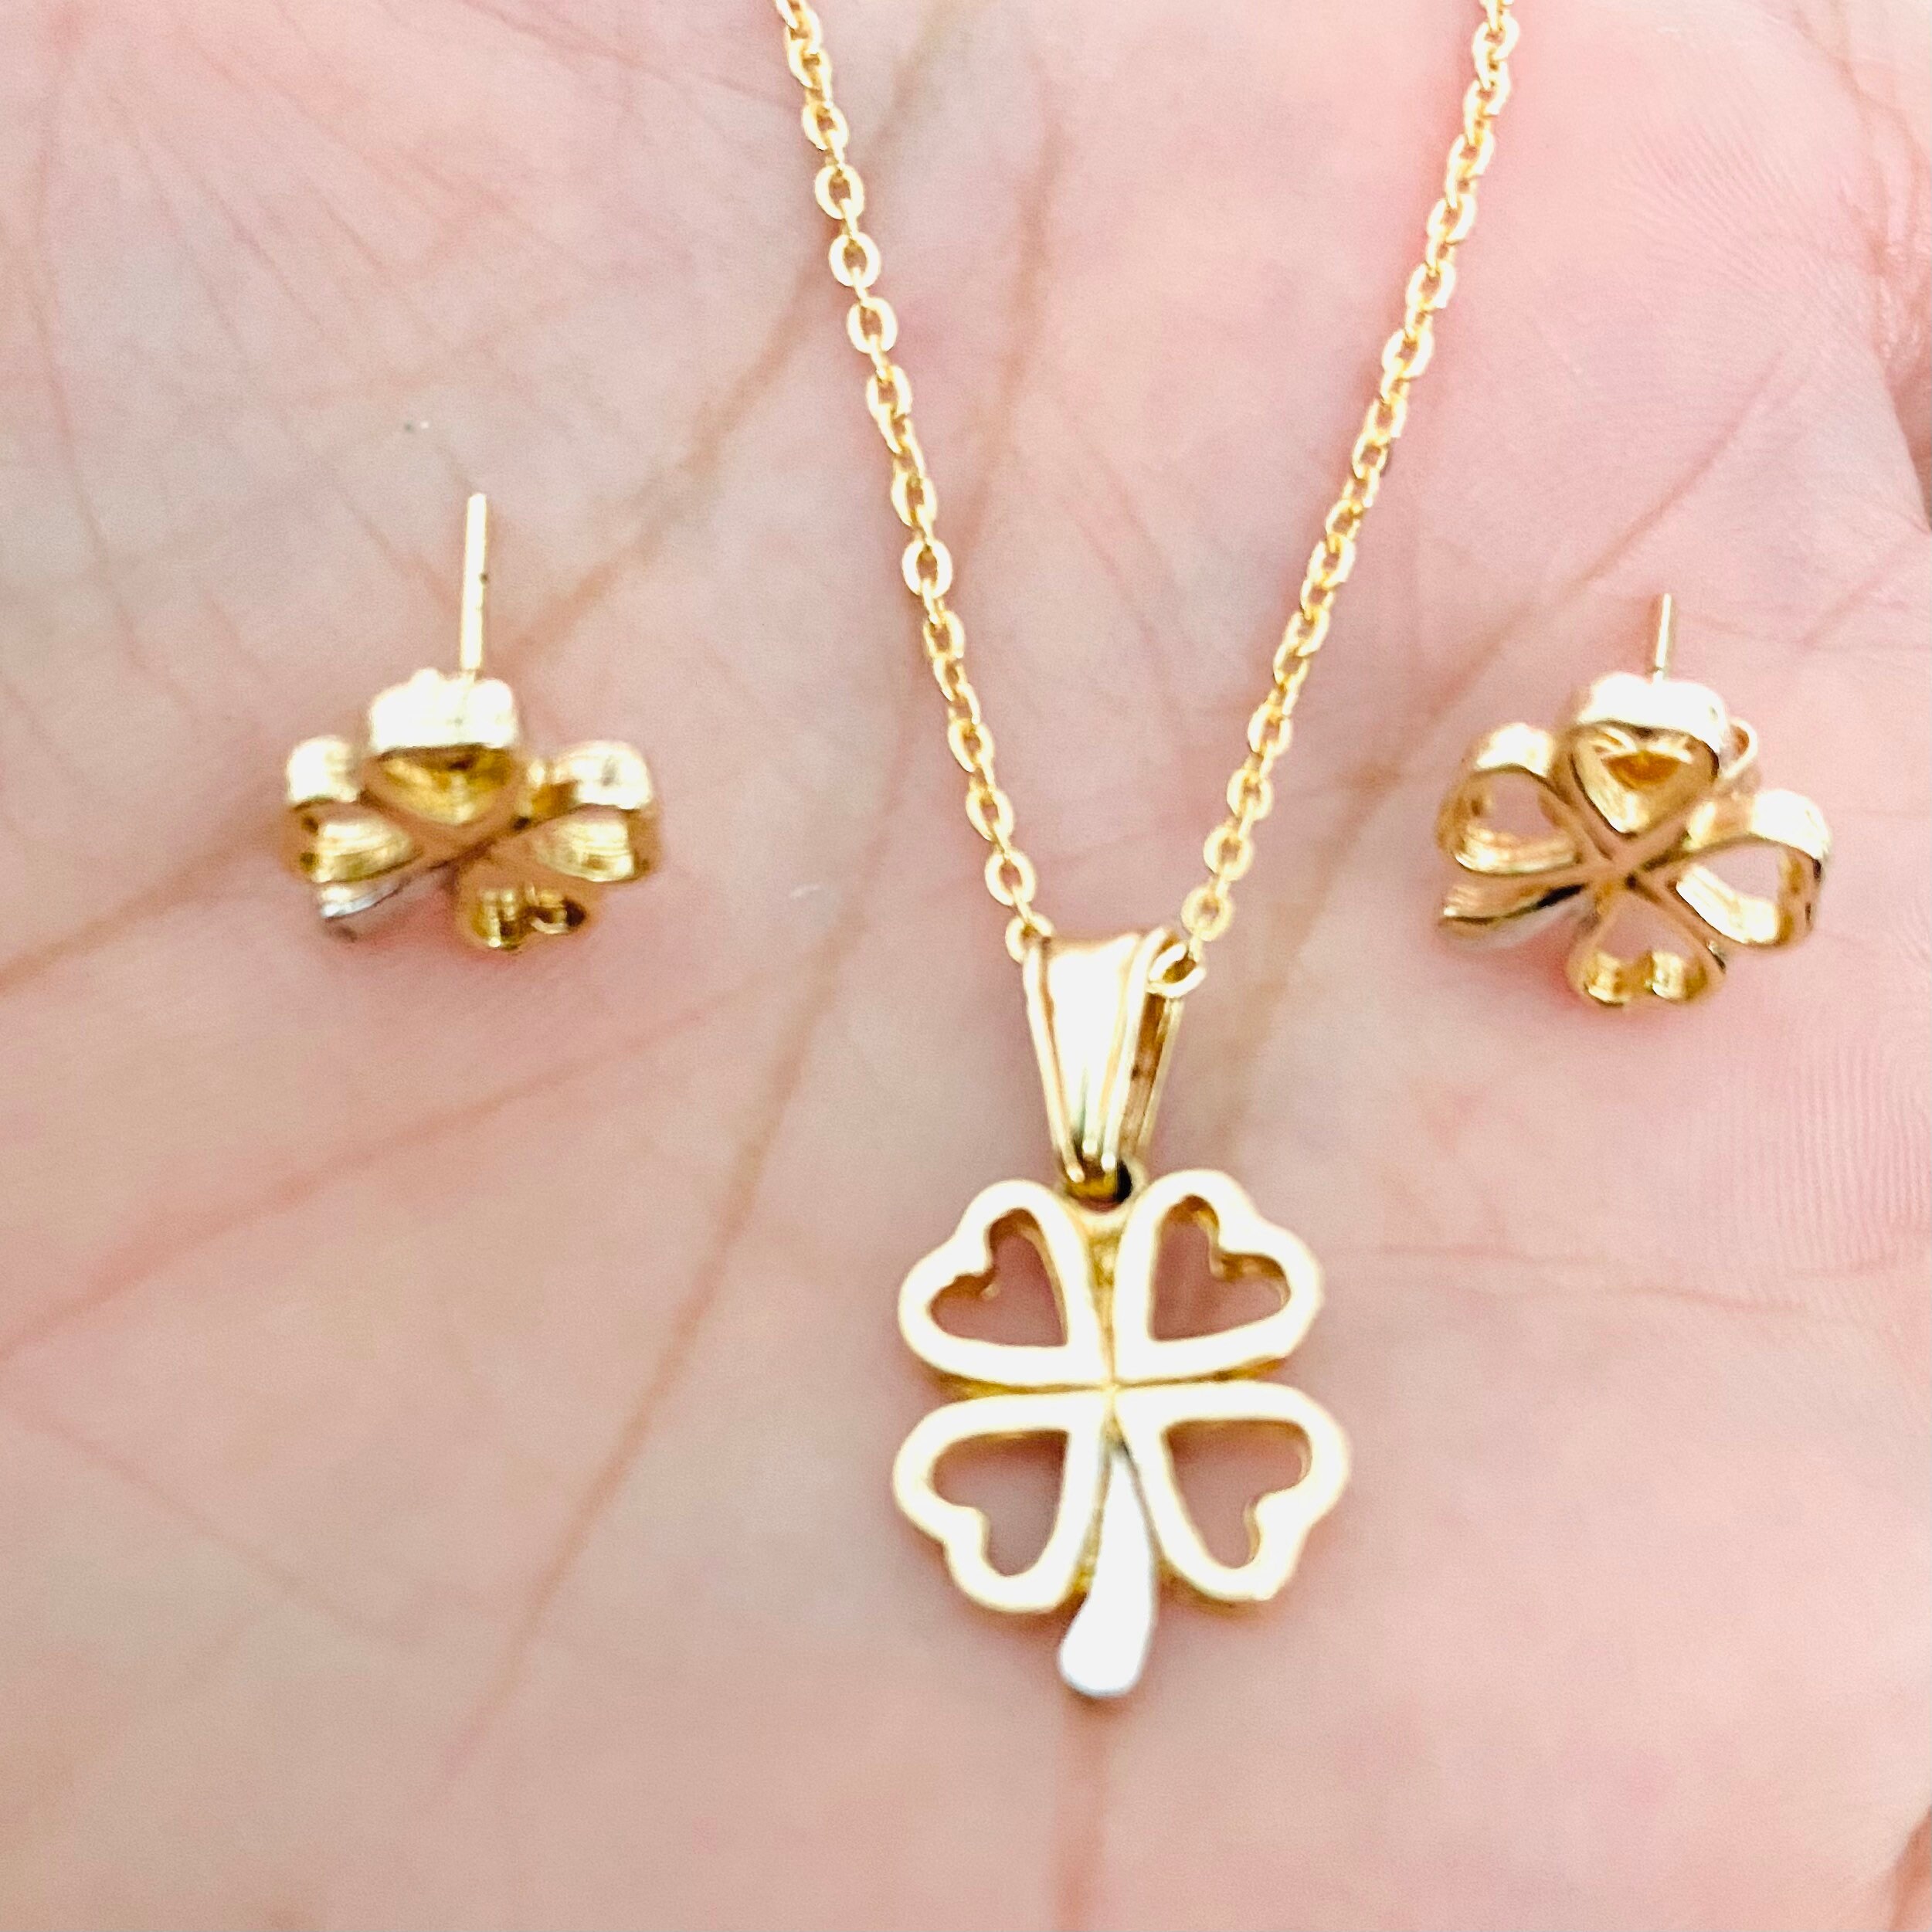 Clover 18K Gold Necklace * Lucky Pendant Necklace * Double Sided Four Leaf Clover Pendant Necklace * Complimentary Jewellery Pouch